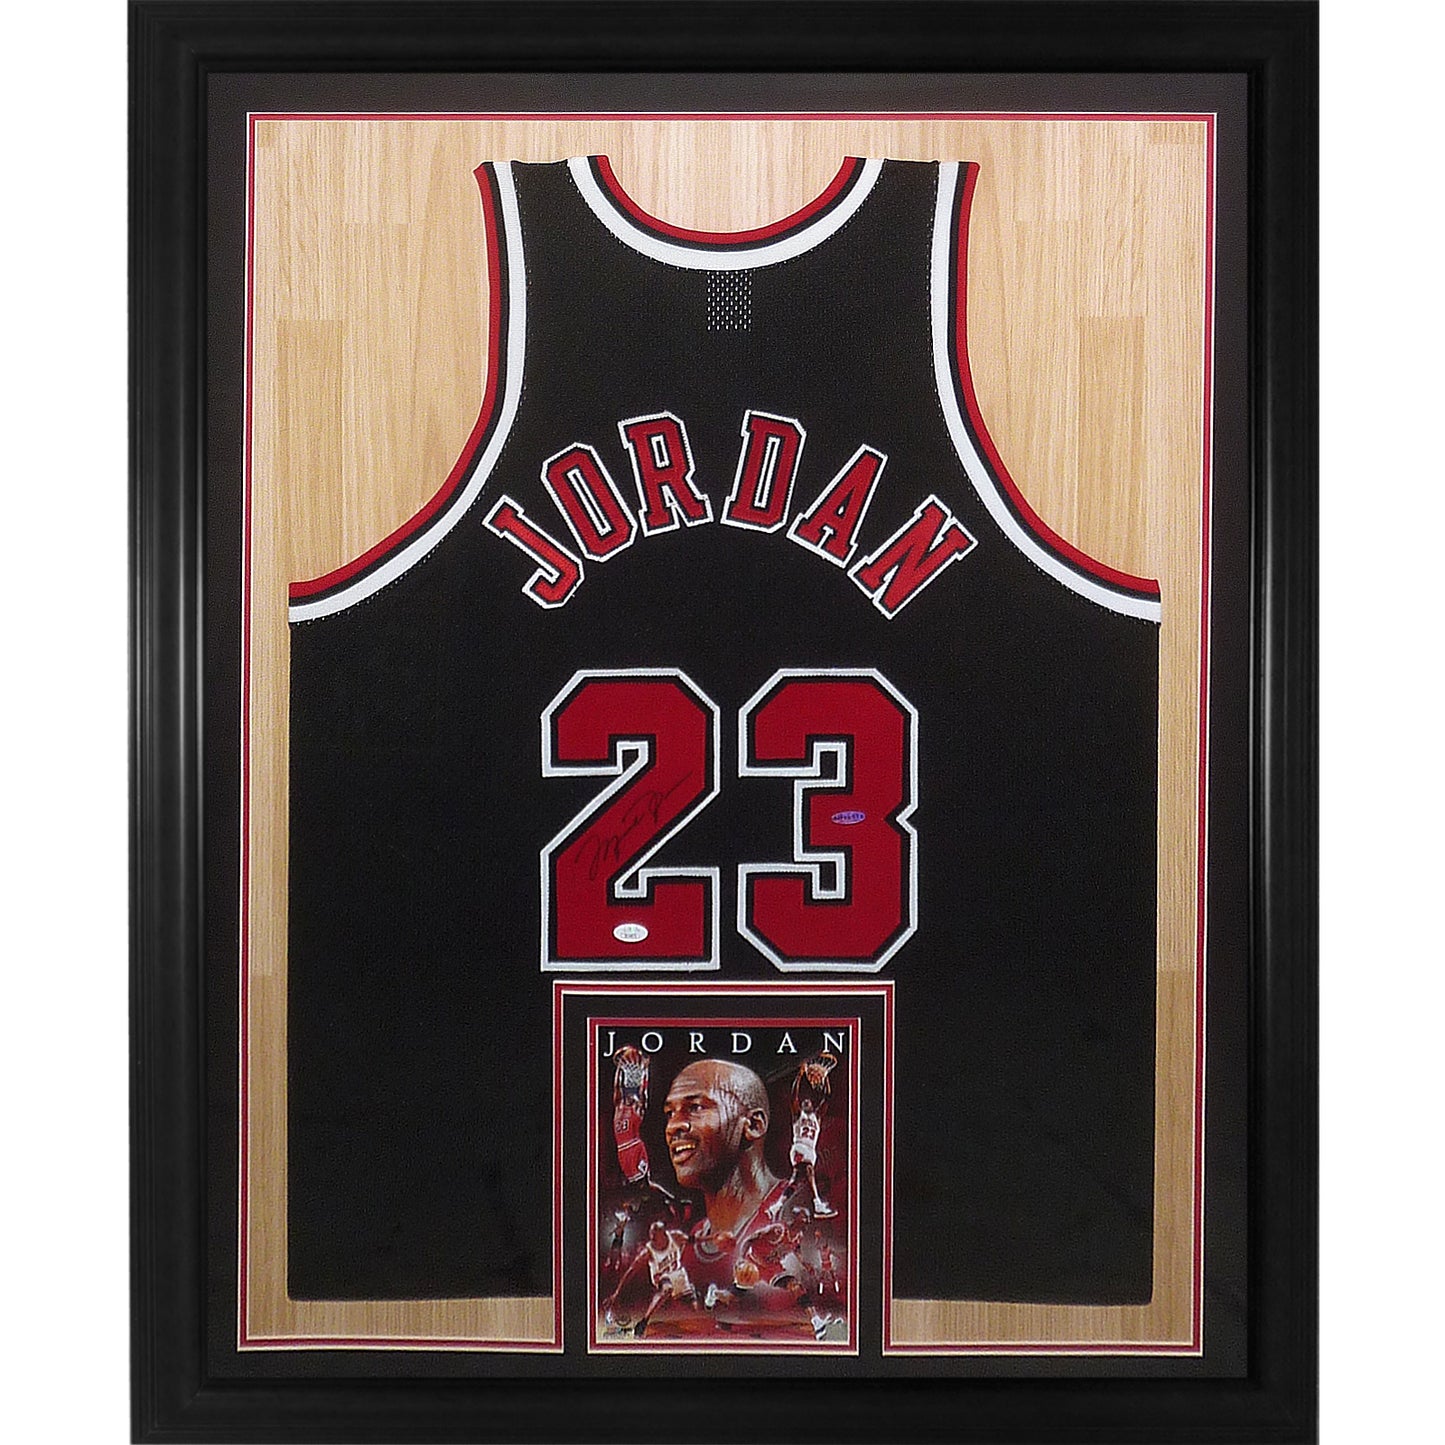 Autographed Chicago Bulls Michael Jordan White Nike Jersey with